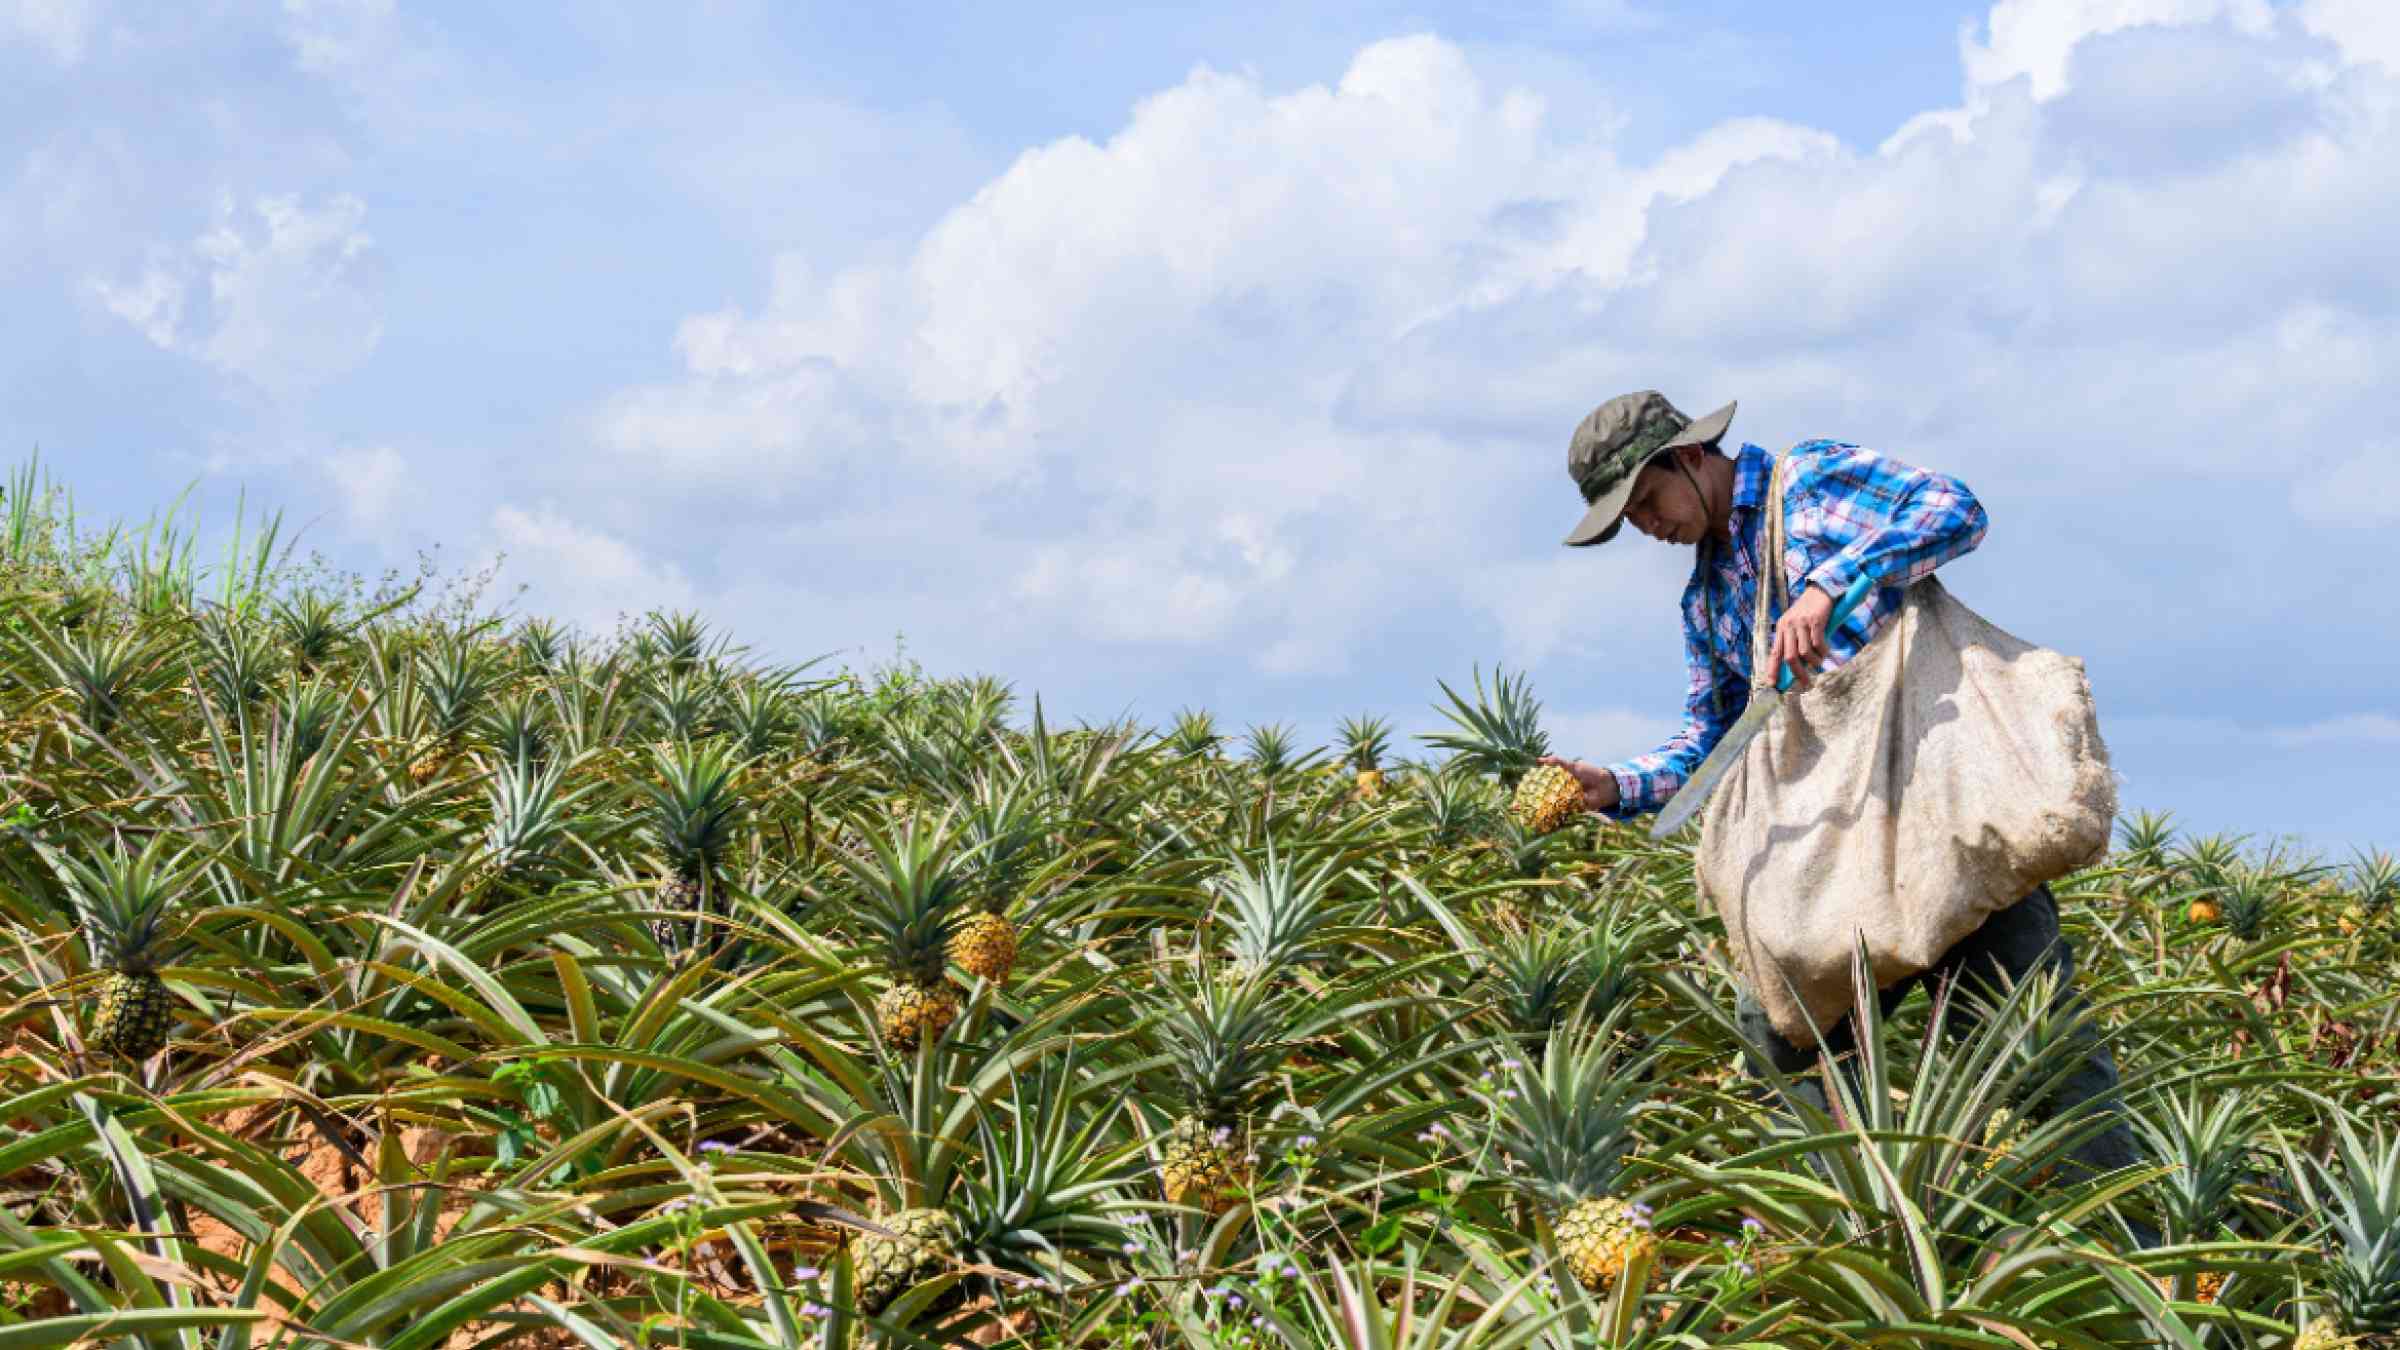 Agriculture worker in a pineapple field under a cloudy sky